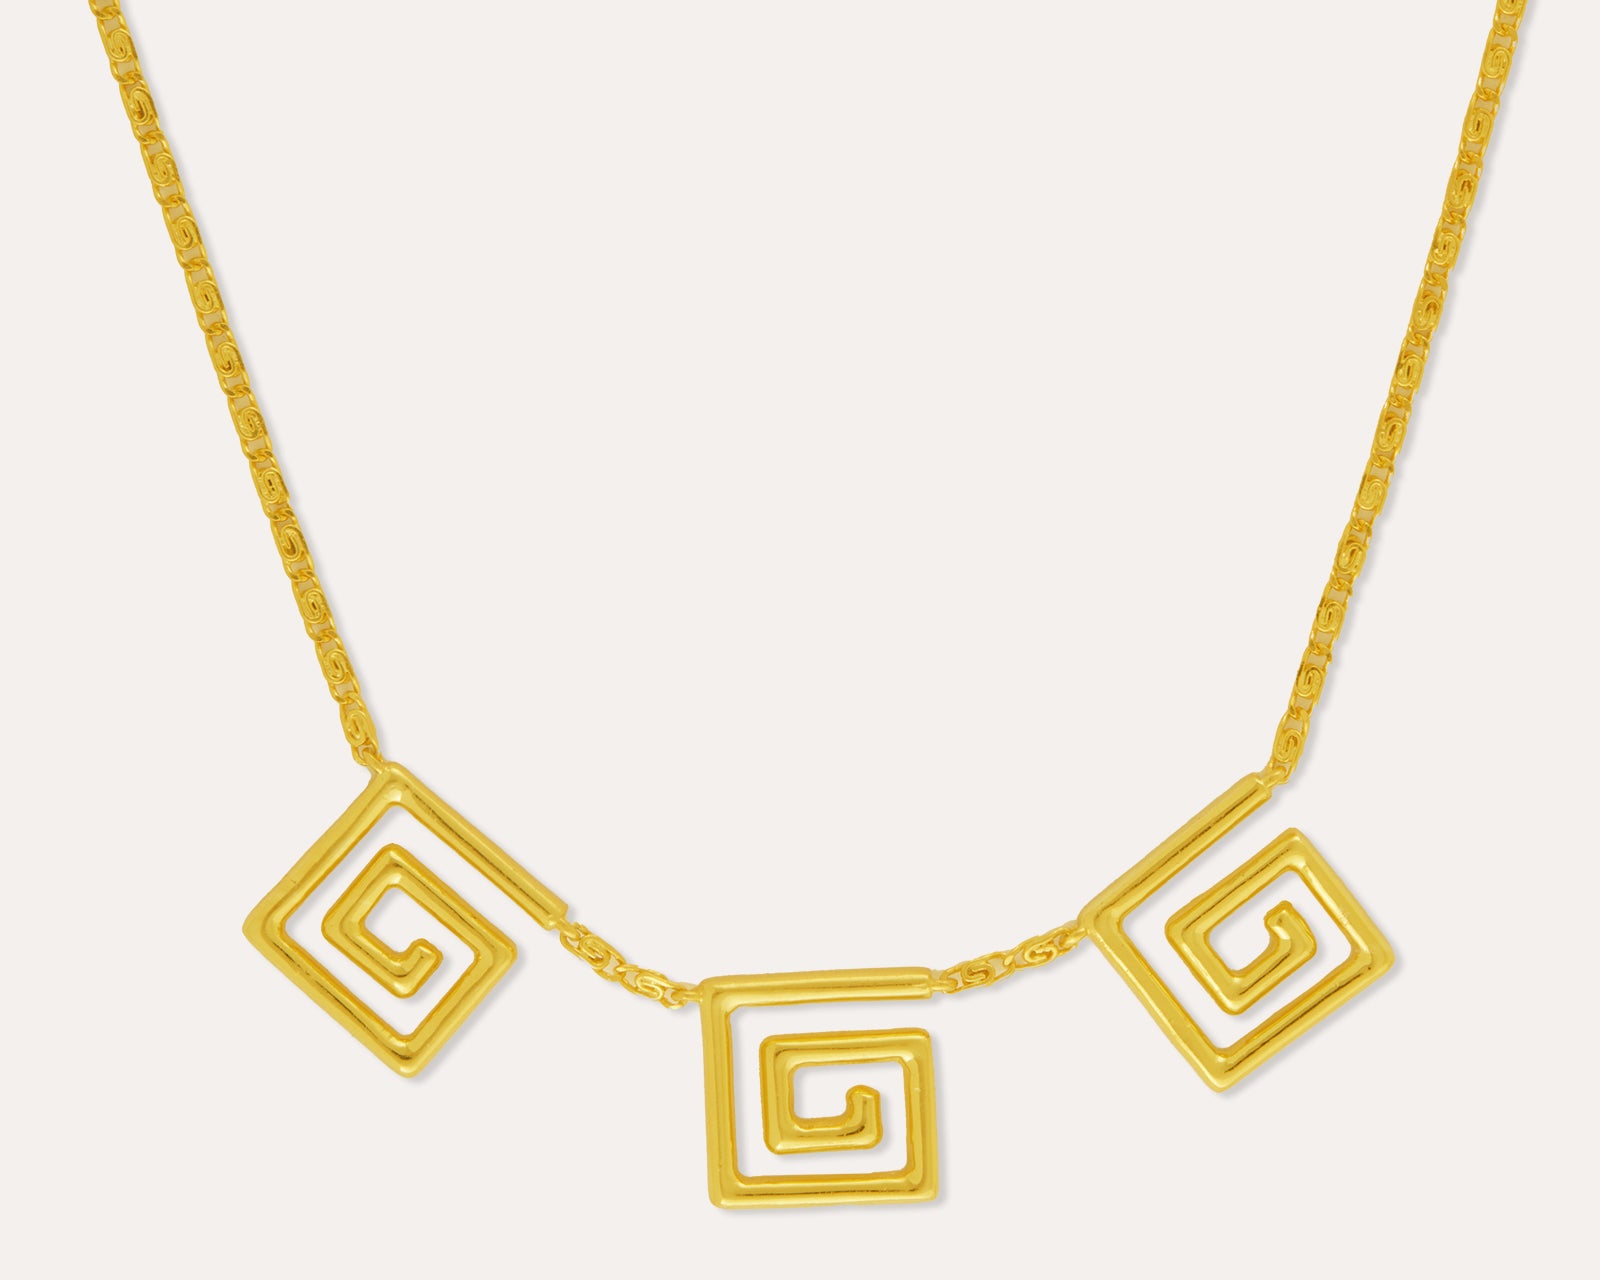 Greek Key Infinity Necklace | Sustainable Jewellery by Ottoman Hands